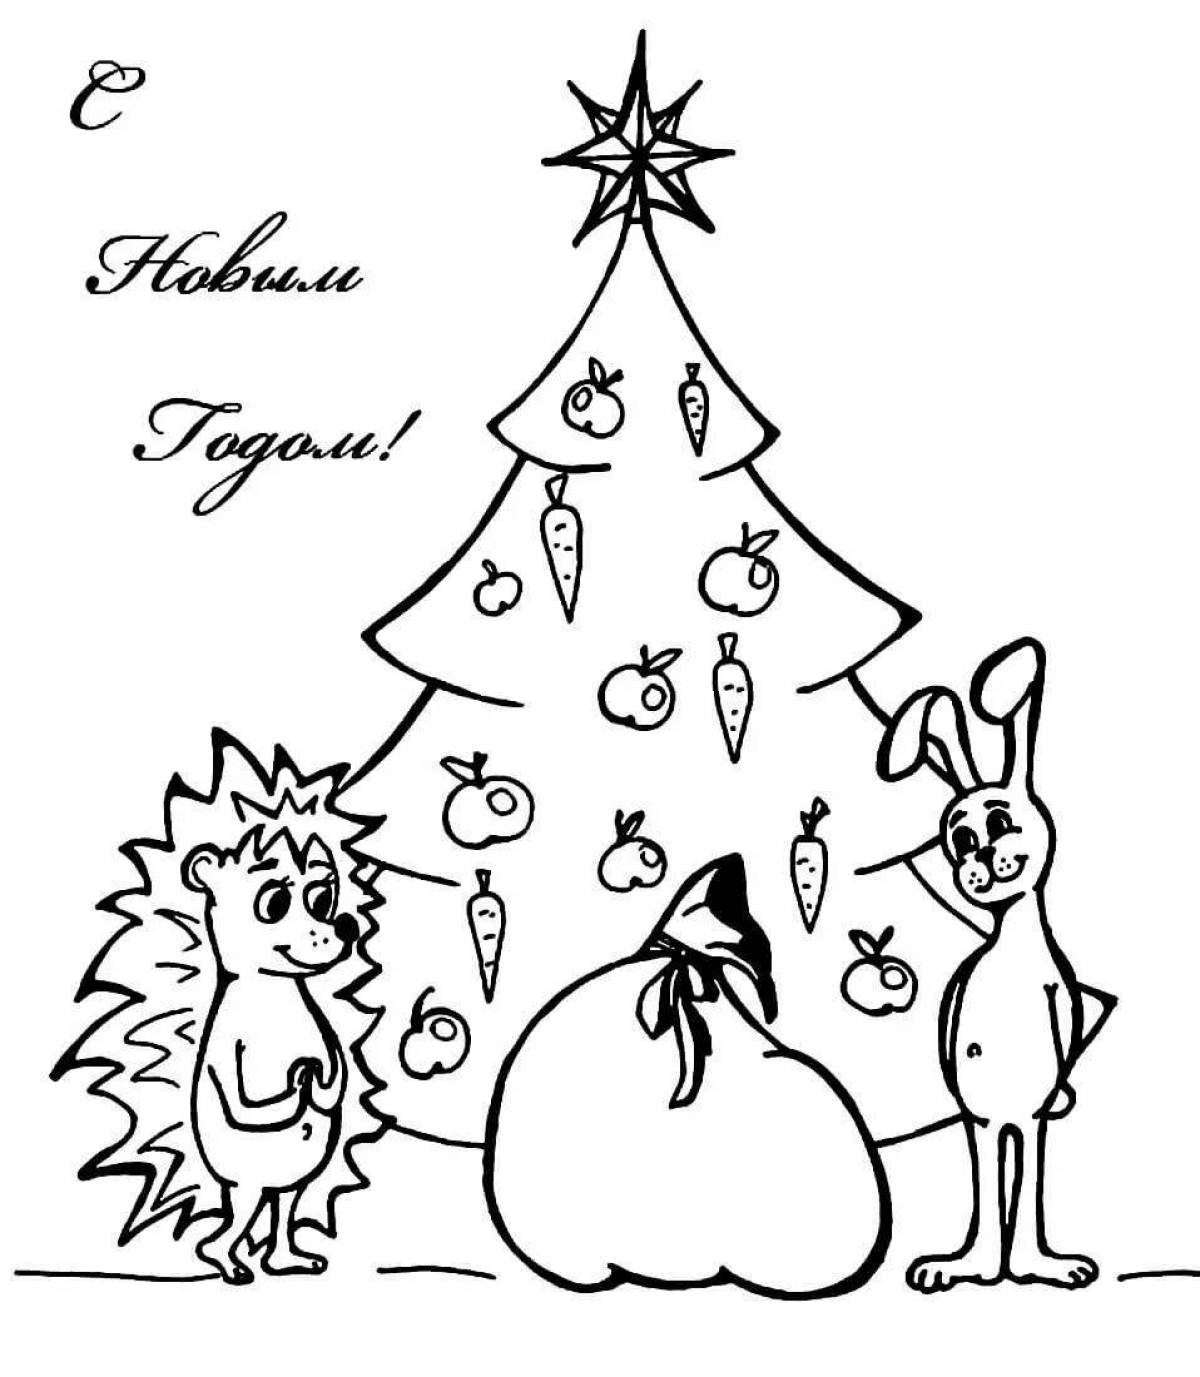 Coloring page awesome forest grown christmas tree